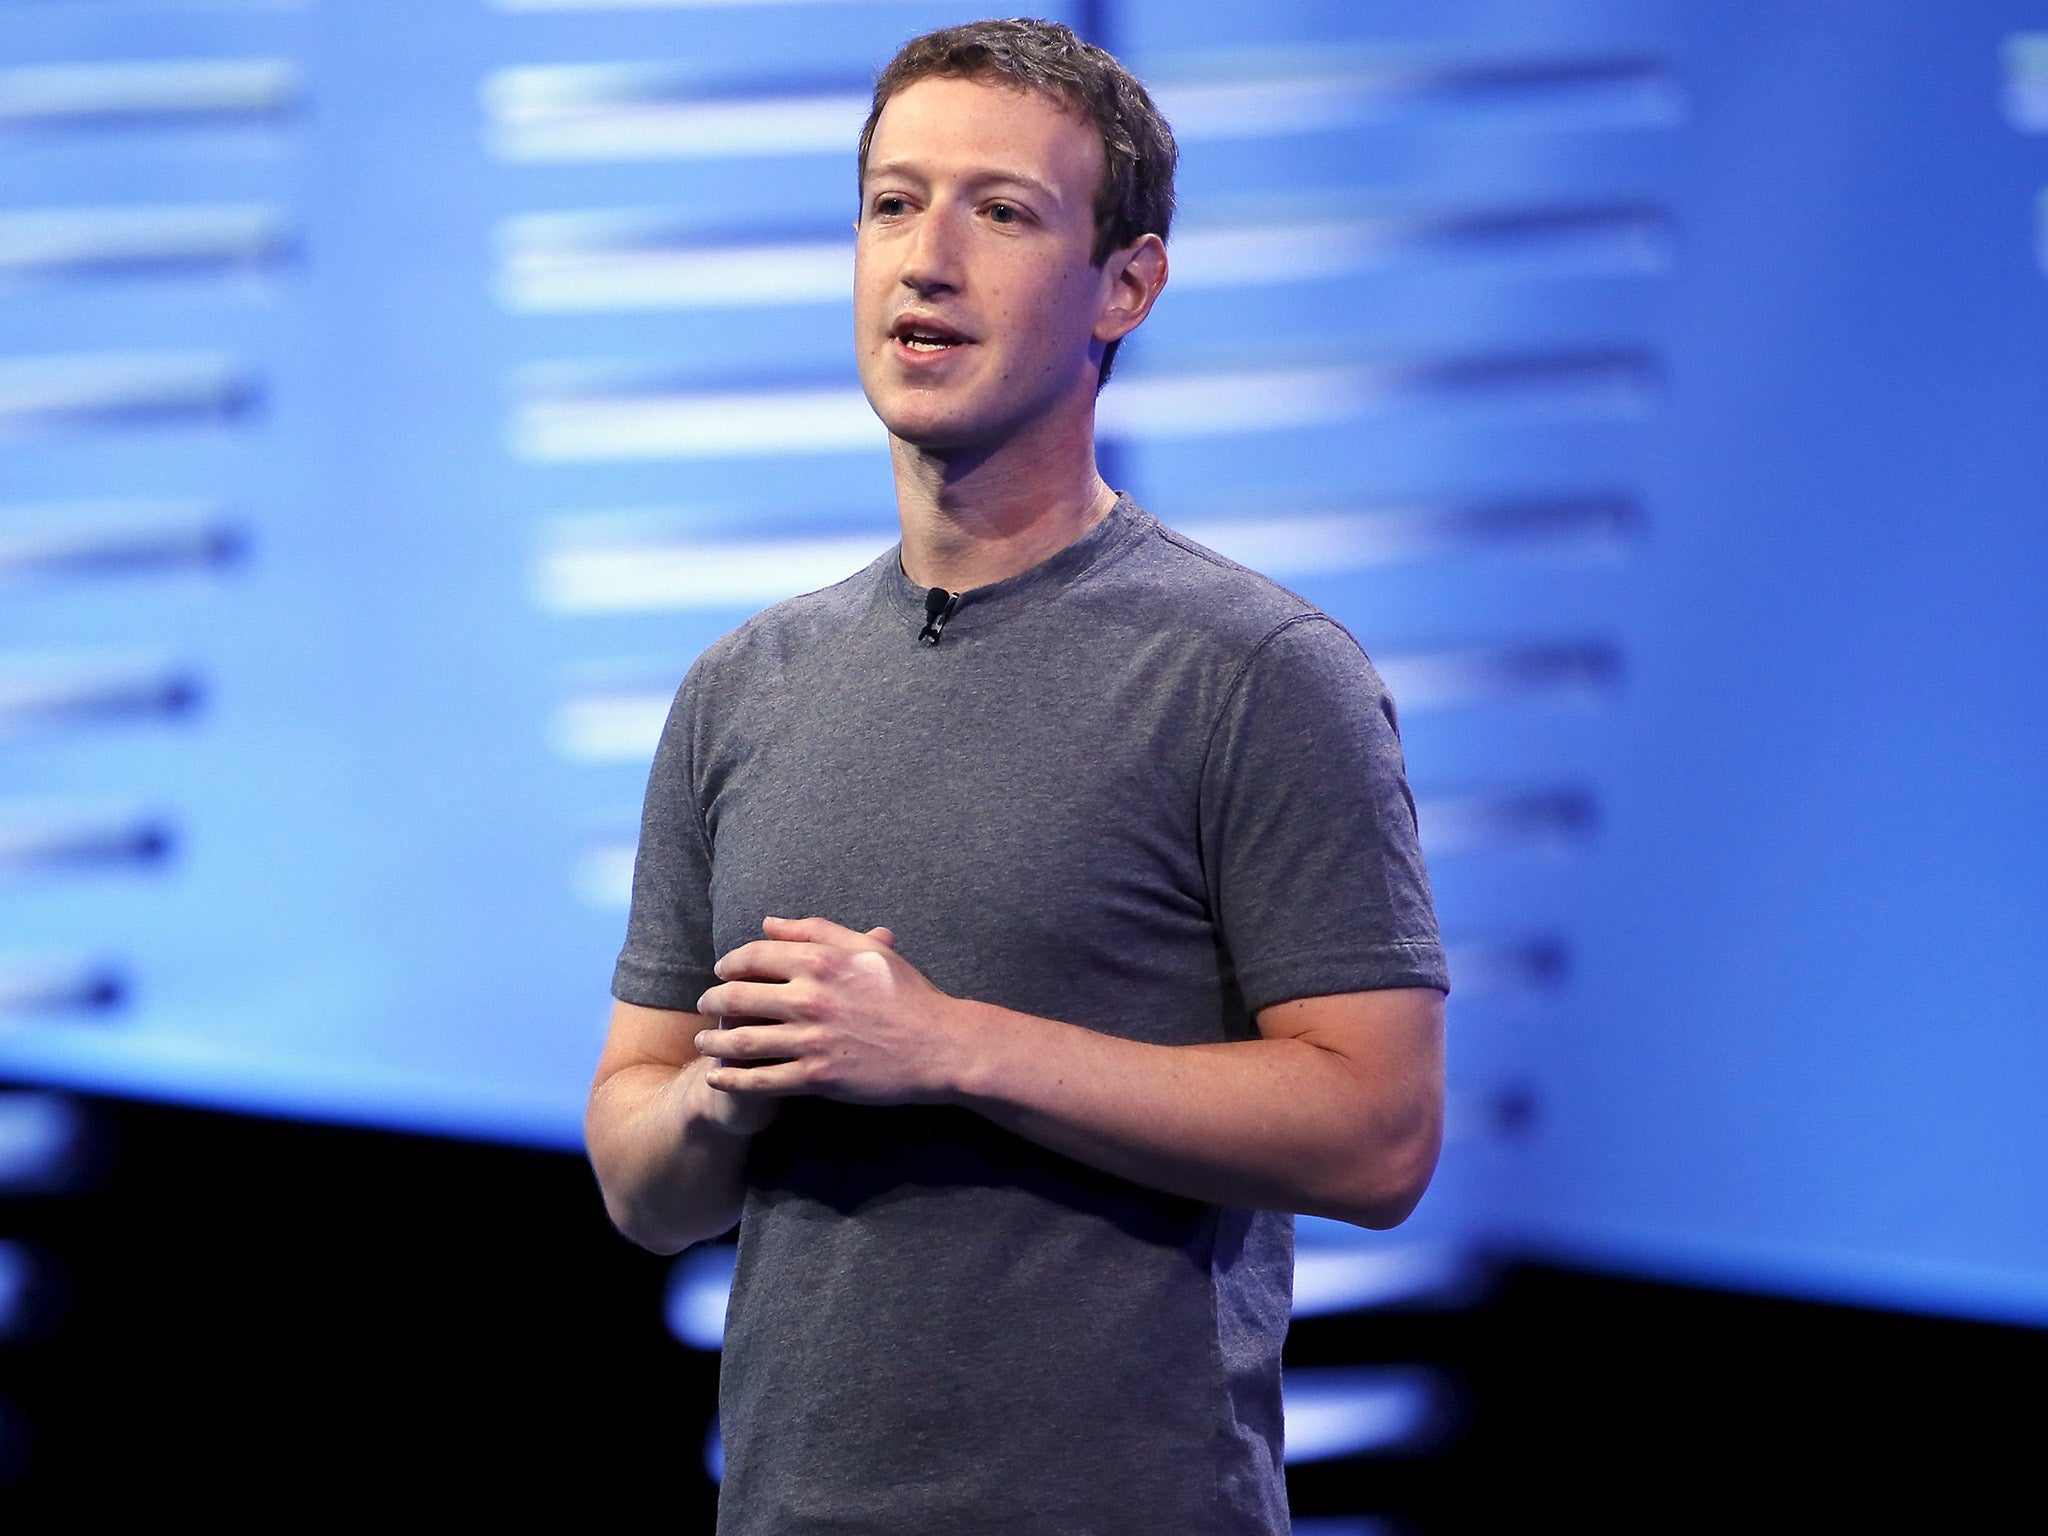 Mark Zuckerberg has ambitions to connect vast numbers of people using drones